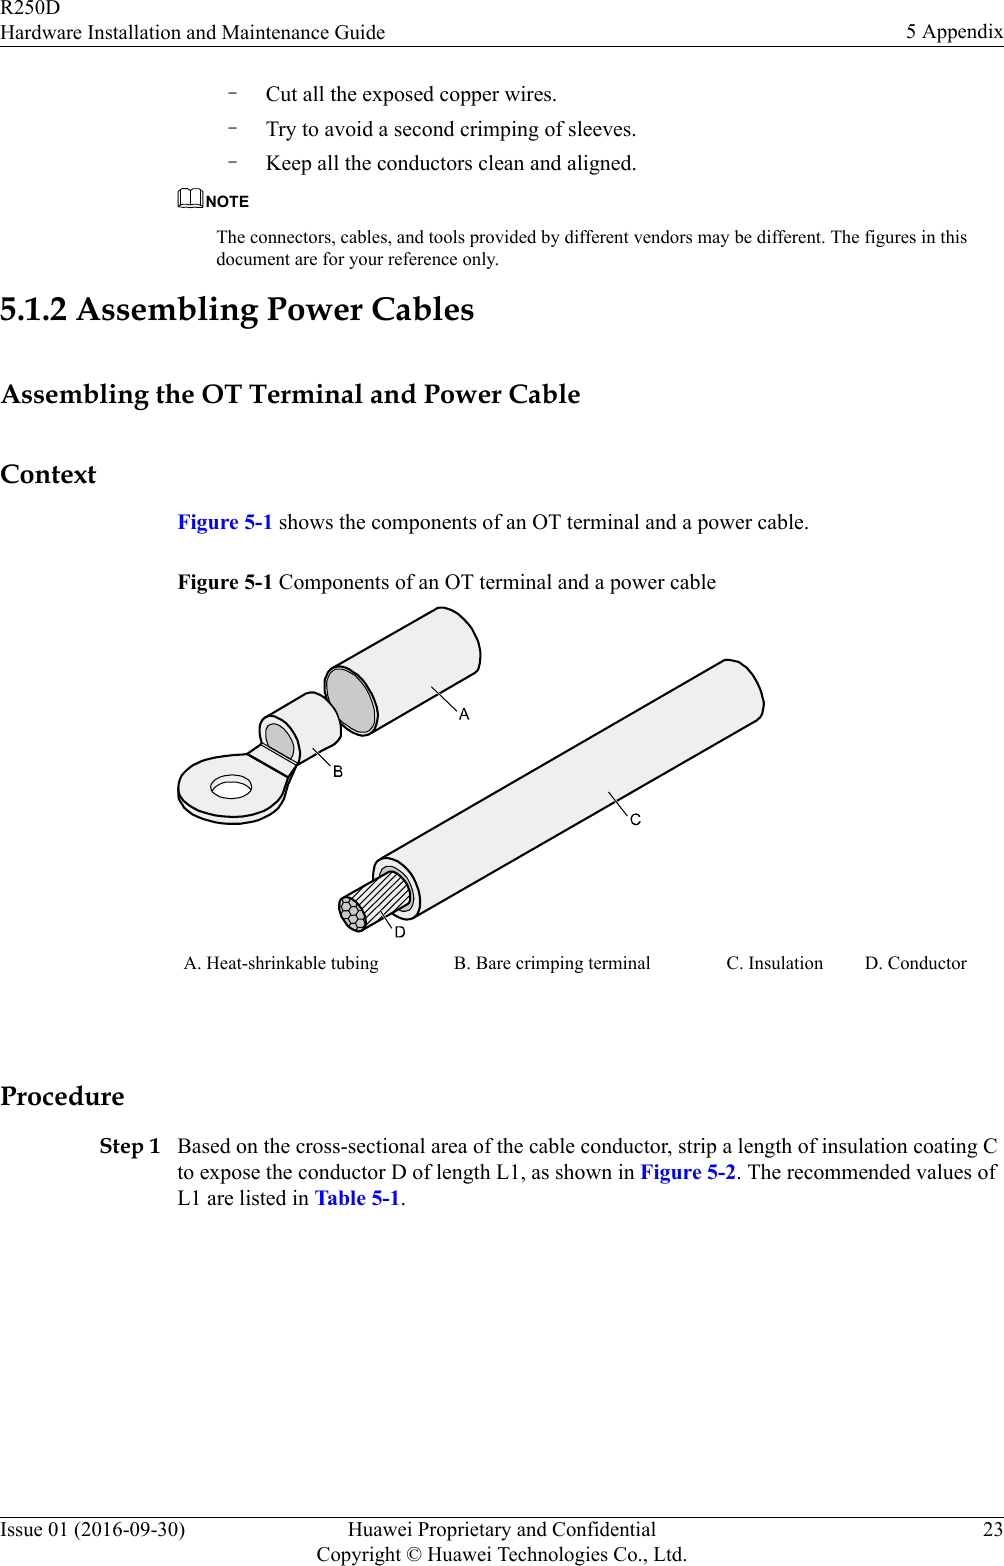 –Cut all the exposed copper wires.–Try to avoid a second crimping of sleeves.–Keep all the conductors clean and aligned.NOTEThe connectors, cables, and tools provided by different vendors may be different. The figures in thisdocument are for your reference only.5.1.2 Assembling Power CablesAssembling the OT Terminal and Power CableContextFigure 5-1 shows the components of an OT terminal and a power cable.Figure 5-1 Components of an OT terminal and a power cableA. Heat-shrinkable tubing B. Bare crimping terminal C. Insulation D. Conductor ProcedureStep 1 Based on the cross-sectional area of the cable conductor, strip a length of insulation coating Cto expose the conductor D of length L1, as shown in Figure 5-2. The recommended values ofL1 are listed in Table 5-1.R250DHardware Installation and Maintenance Guide 5 AppendixIssue 01 (2016-09-30) Huawei Proprietary and ConfidentialCopyright © Huawei Technologies Co., Ltd.23